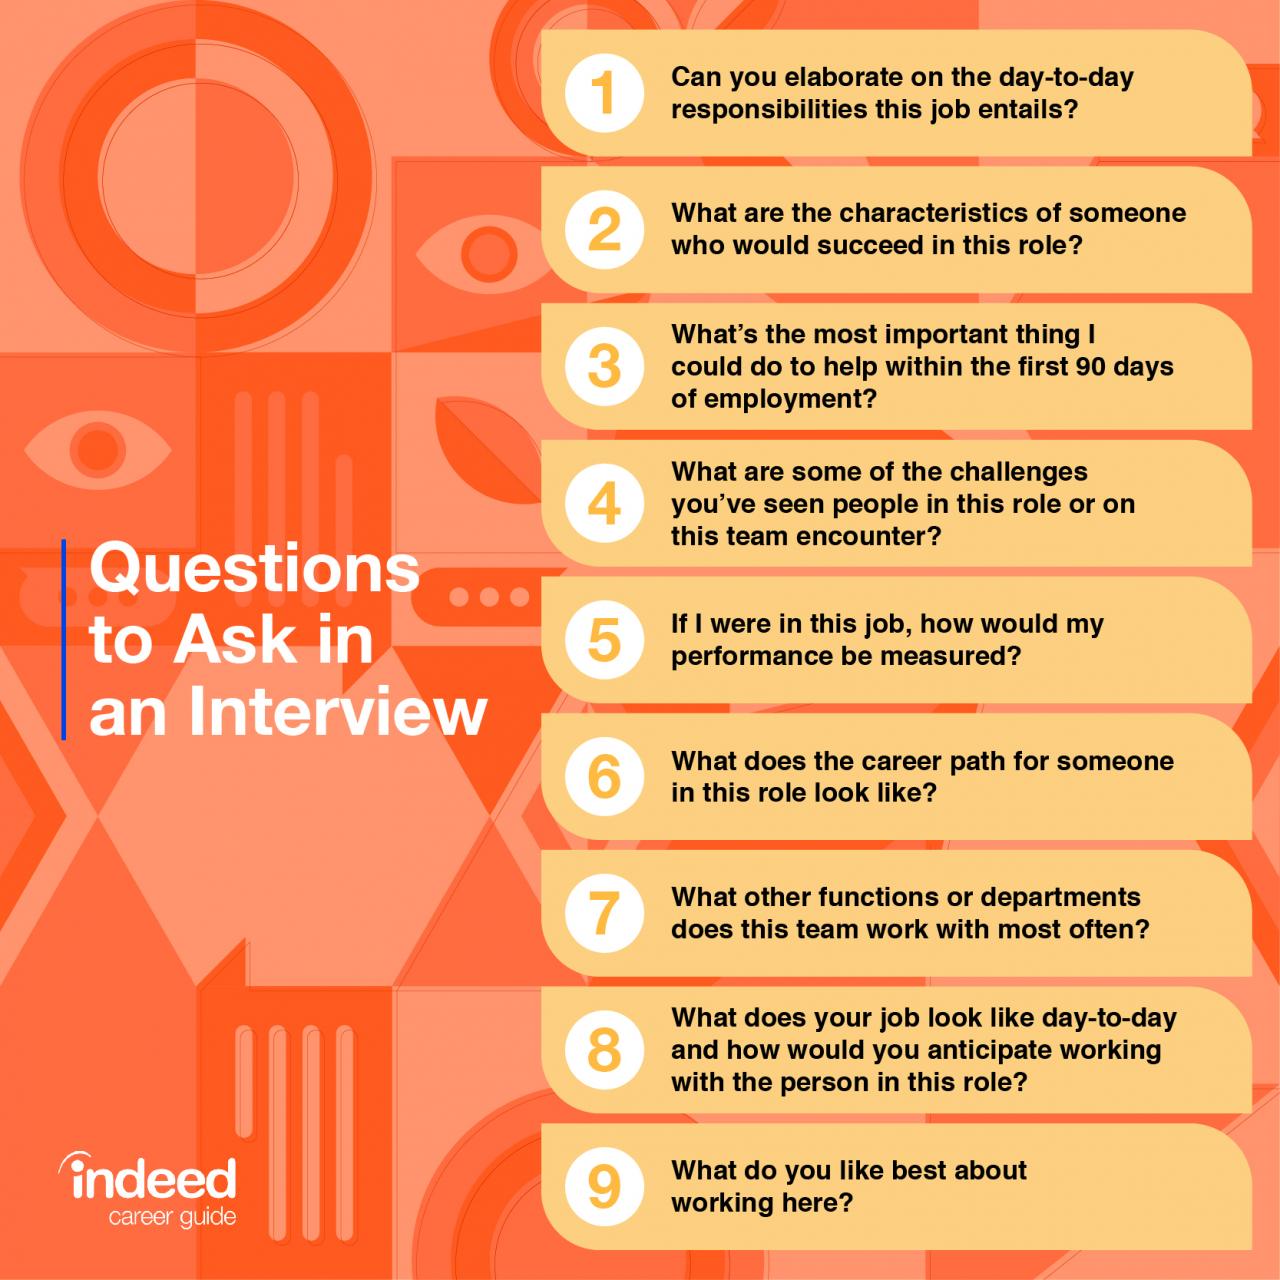 10 questions you can ask in an interview